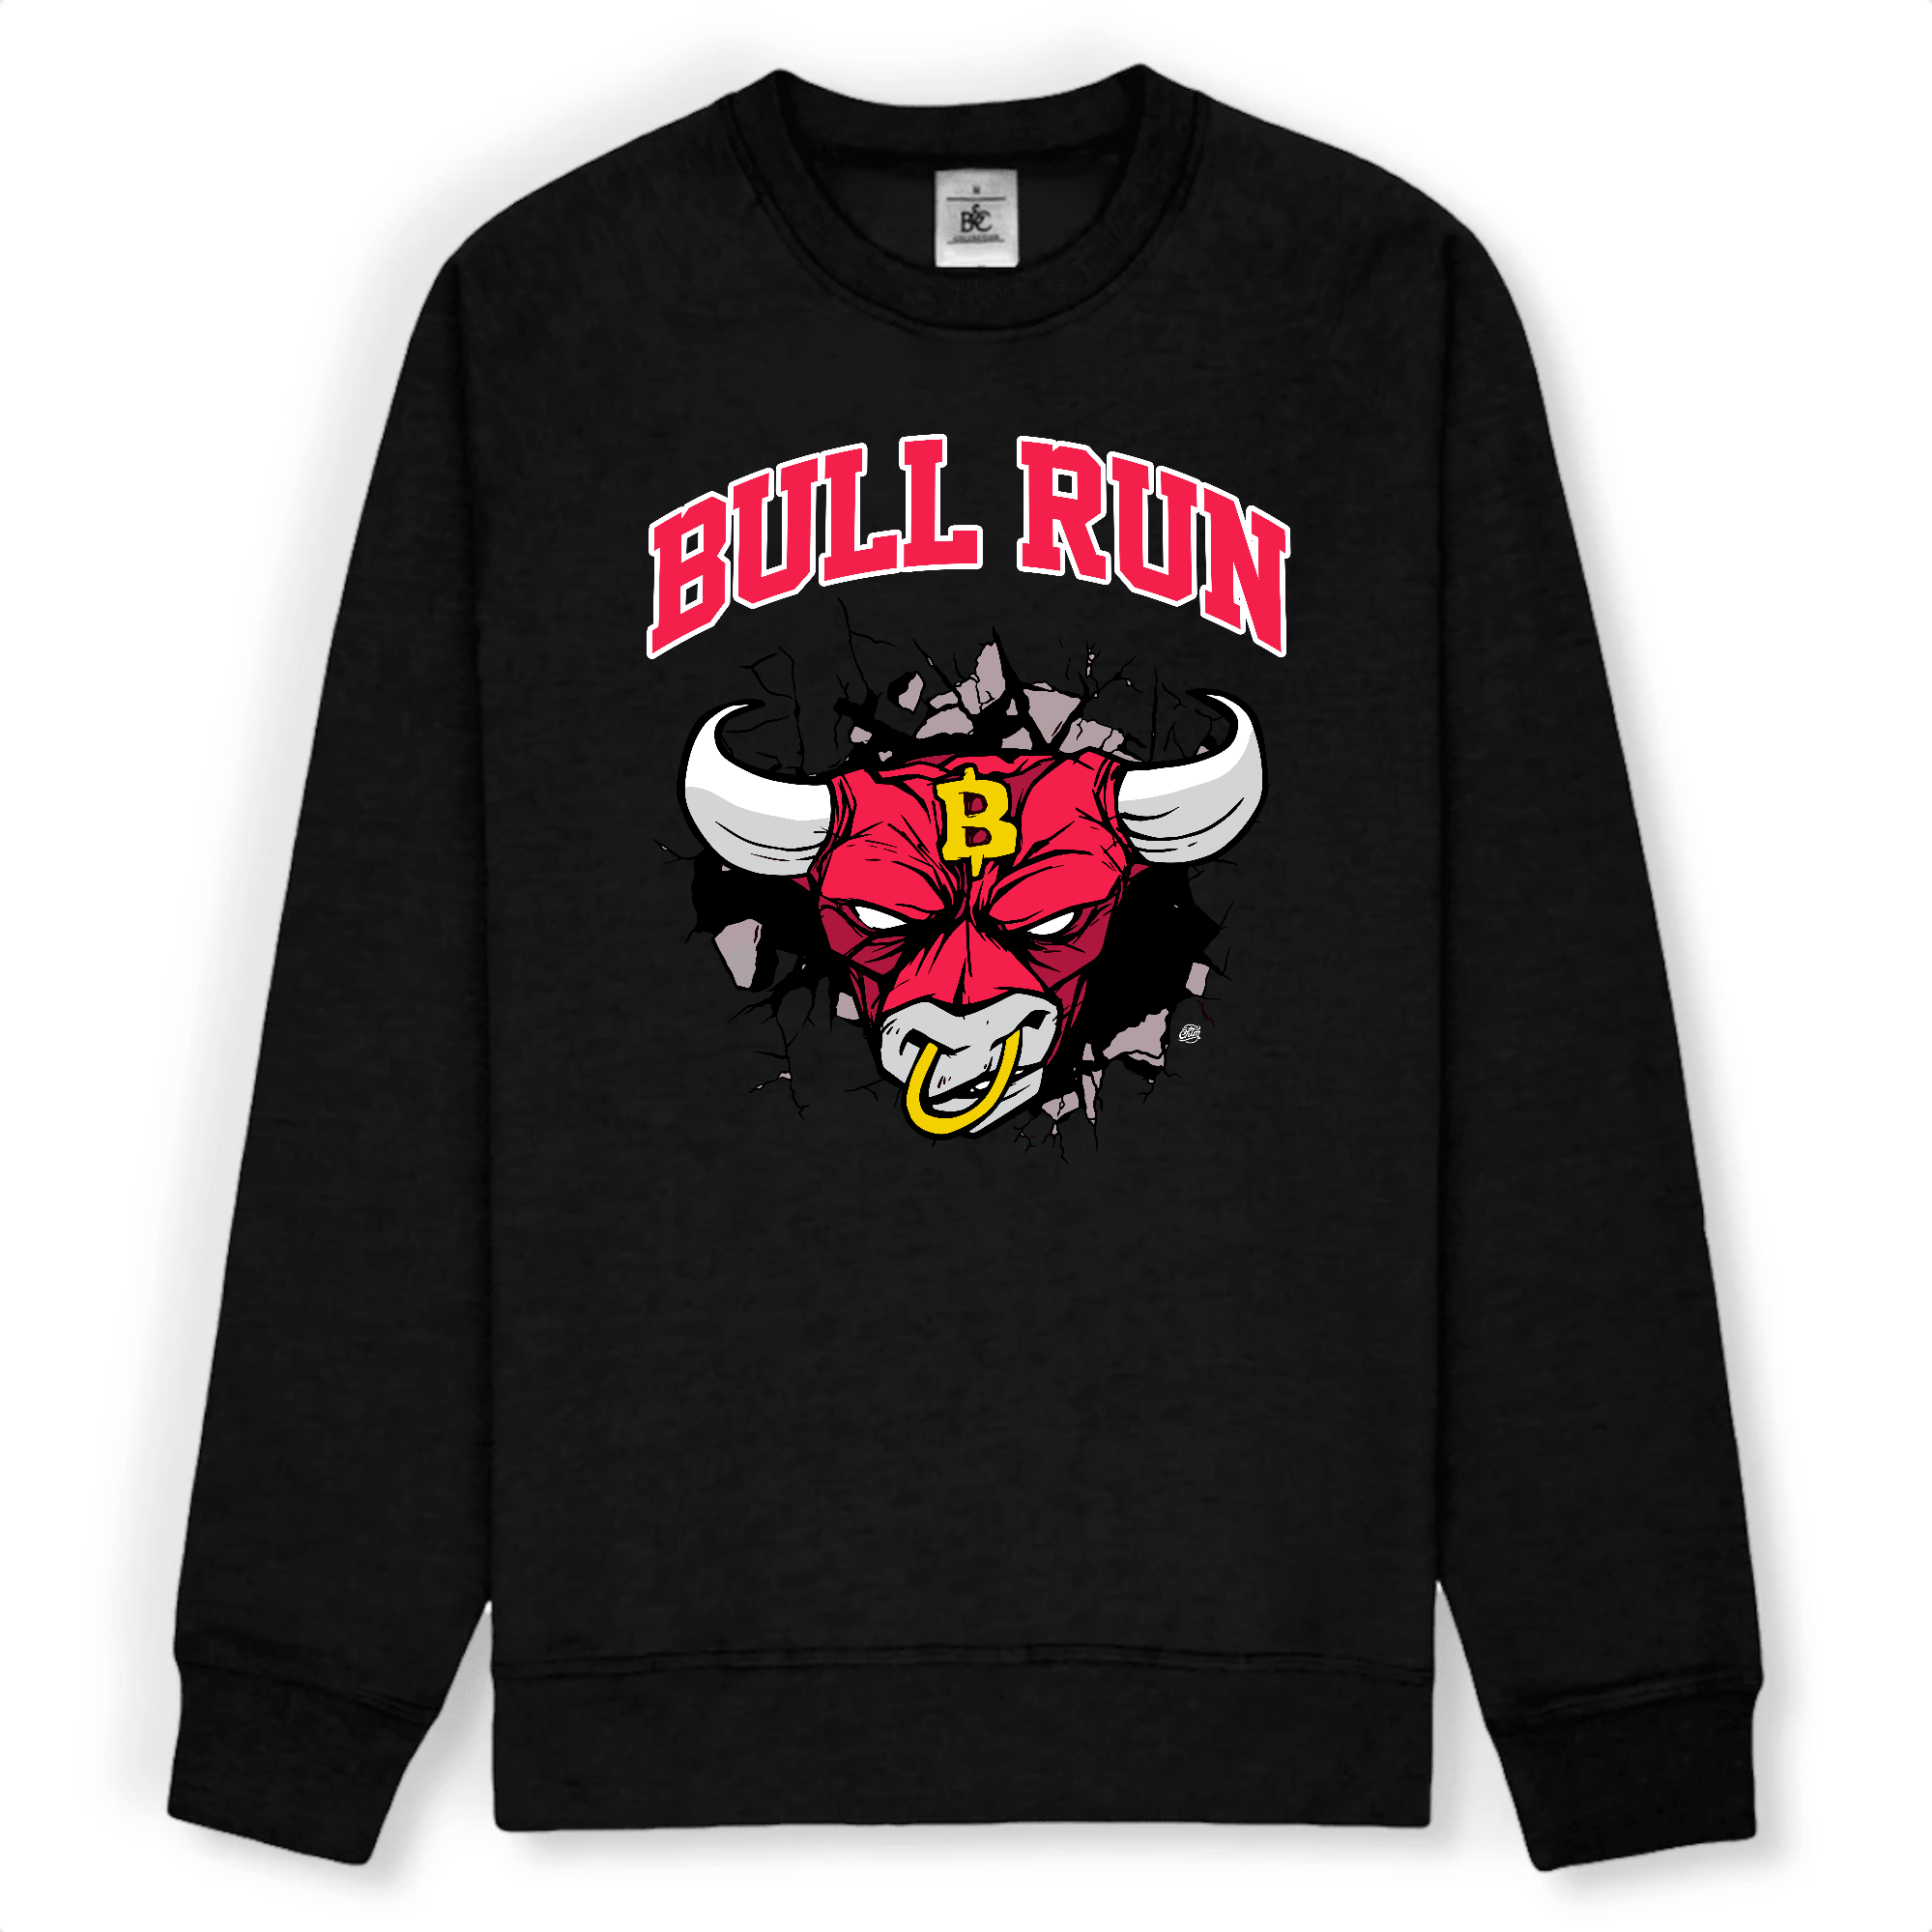 Pull crypto - BULL RUN -  from chtmboutique by chtmboutique - BITCOIN, CRYPTO, PULL